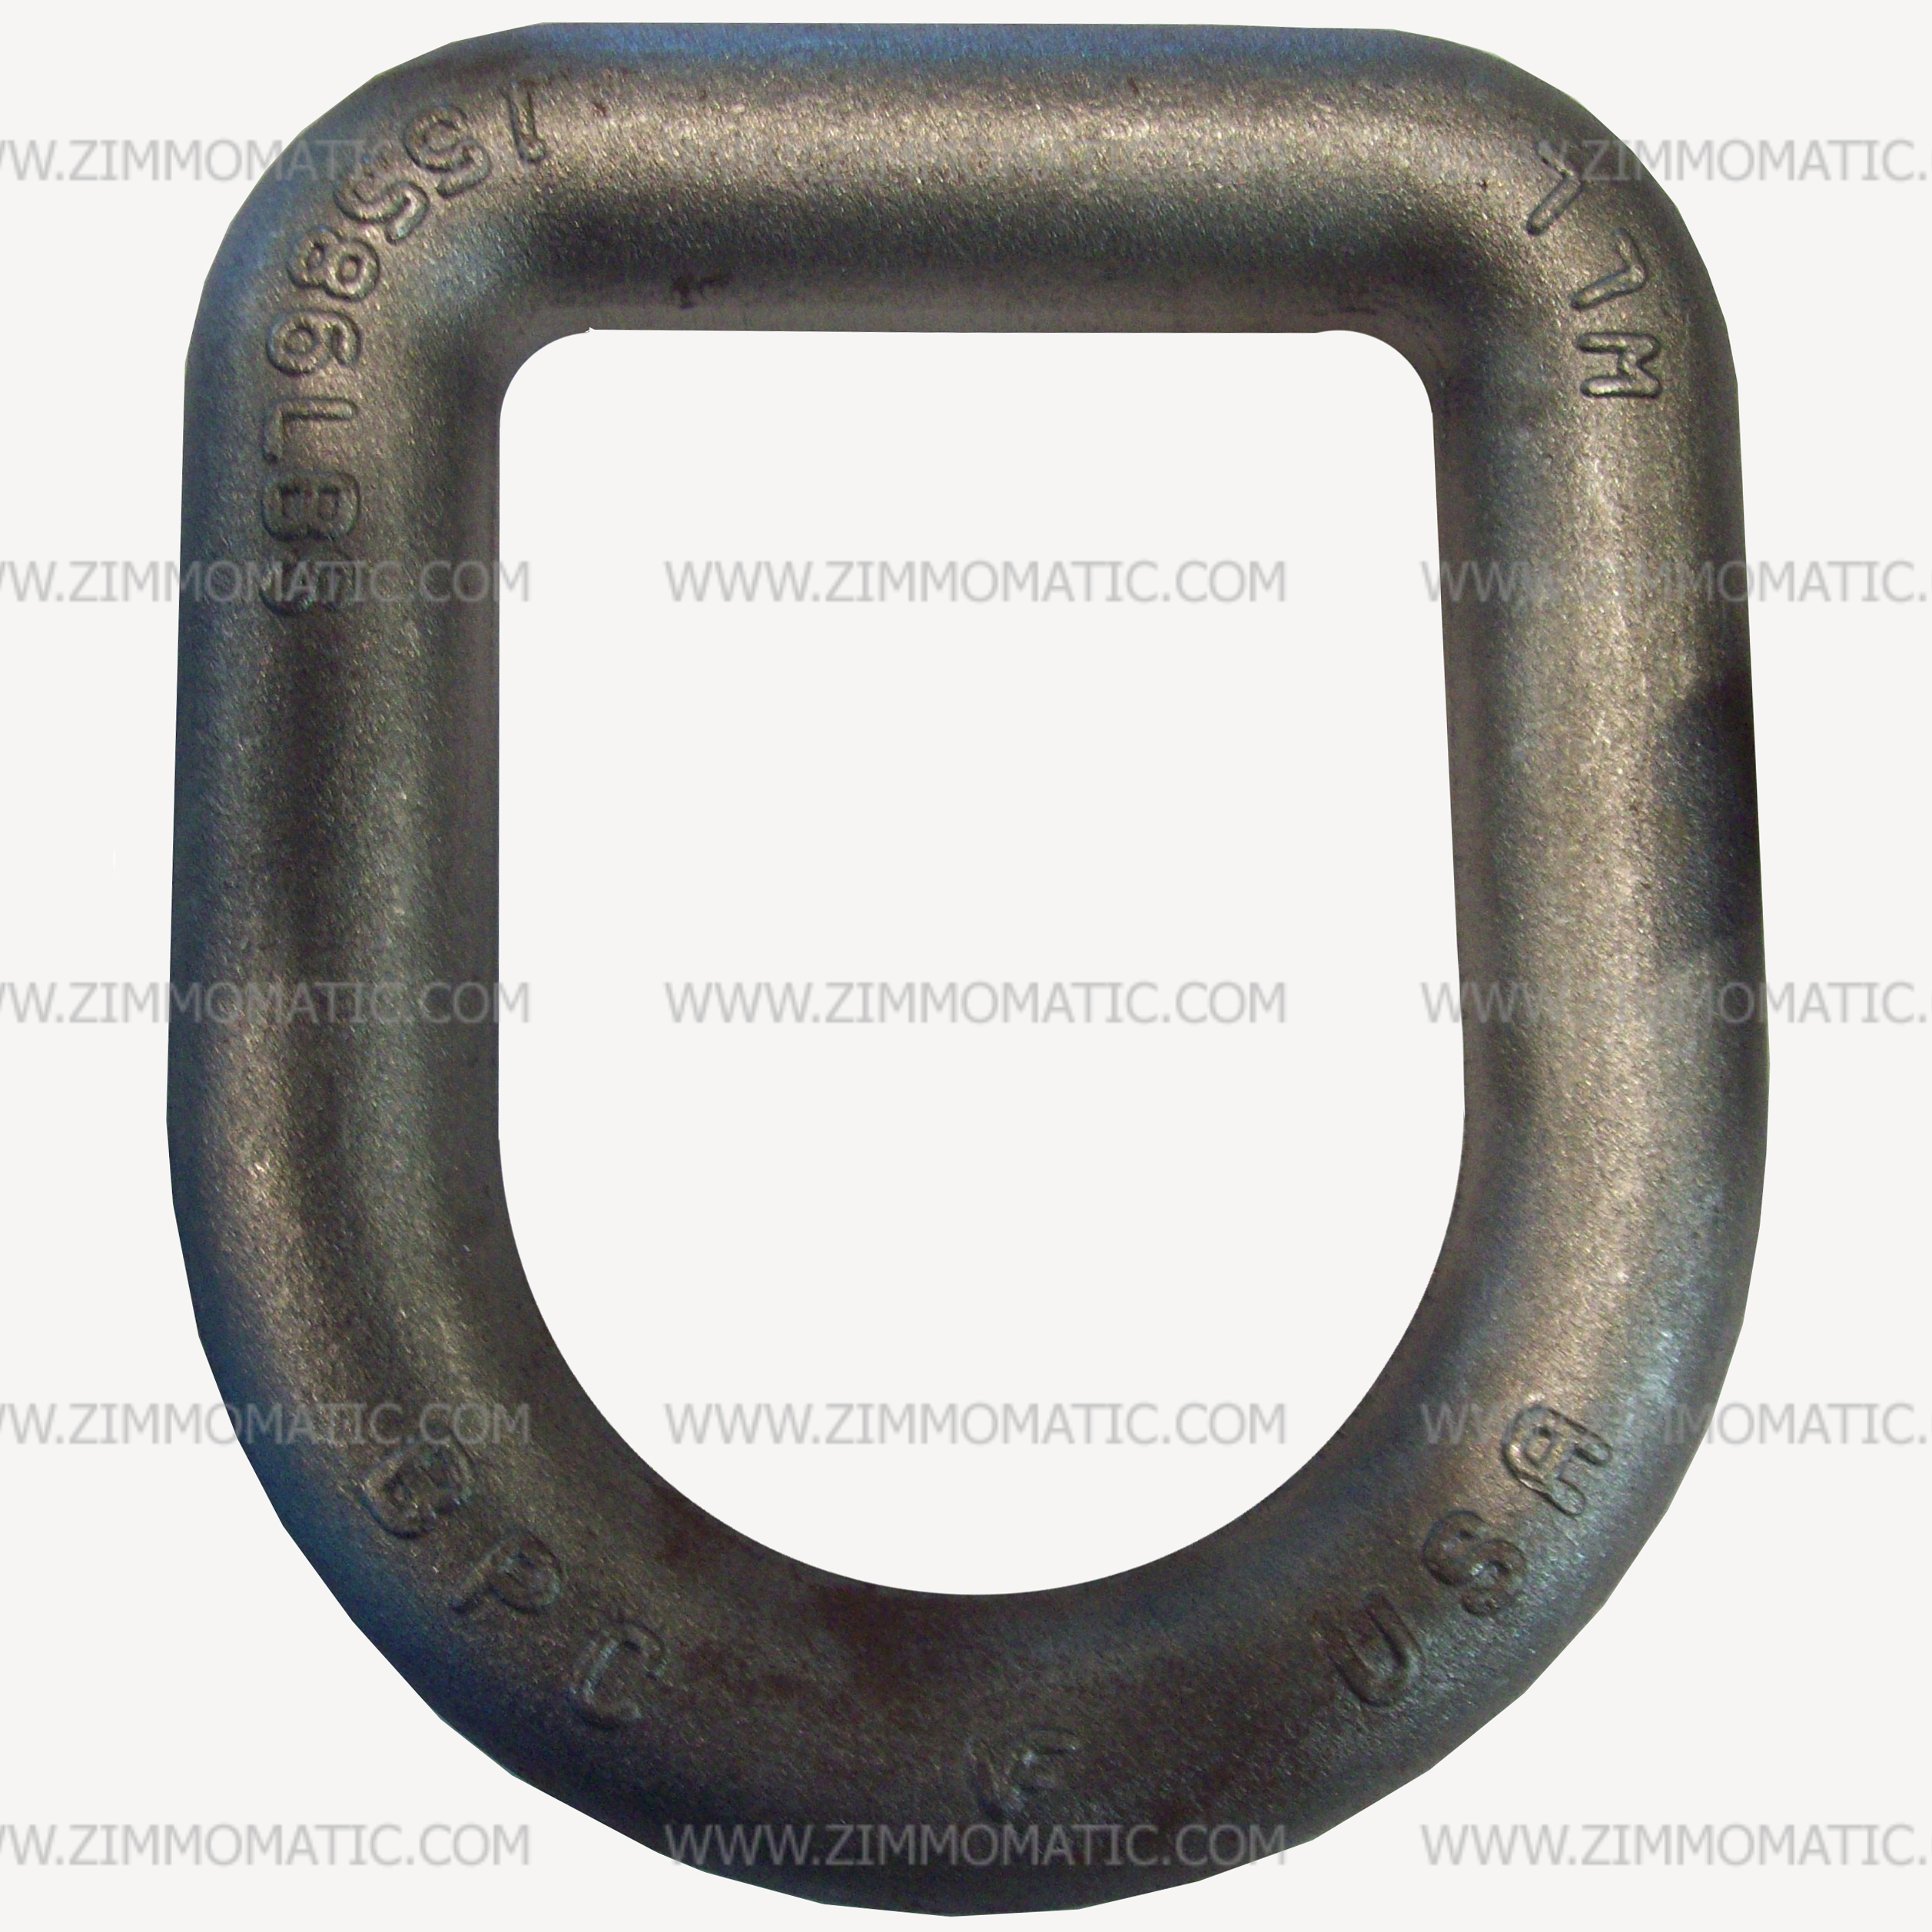 d-ring, 1 inch diameter, used on pintle hitch plates for chain hooks